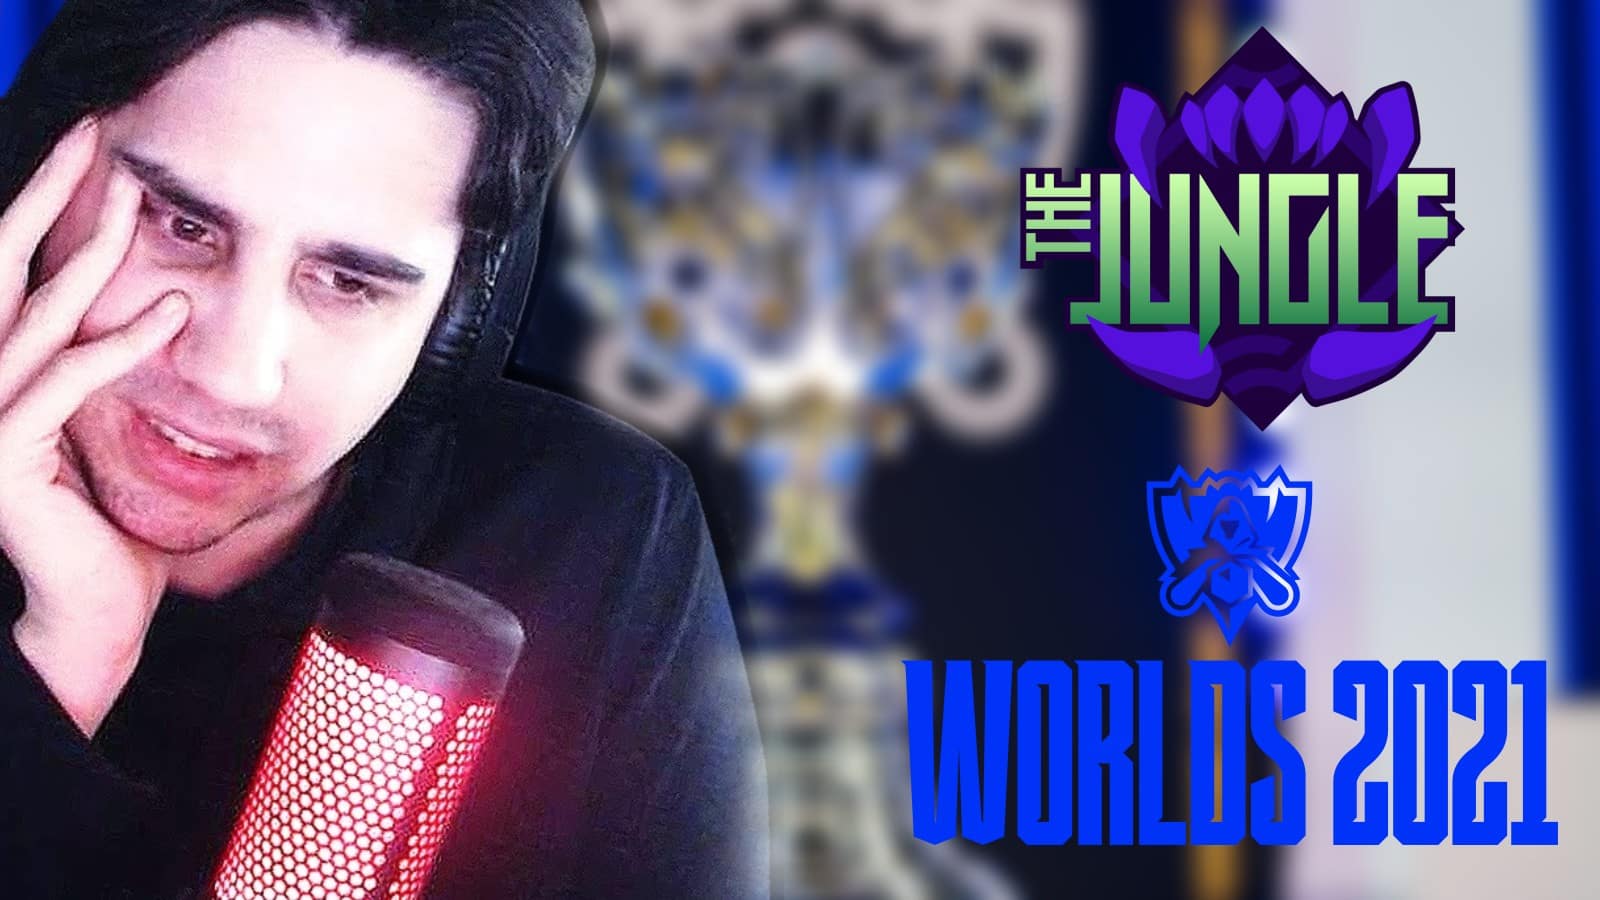 IWillDominate with logos for The Jungle and Worlds 2021